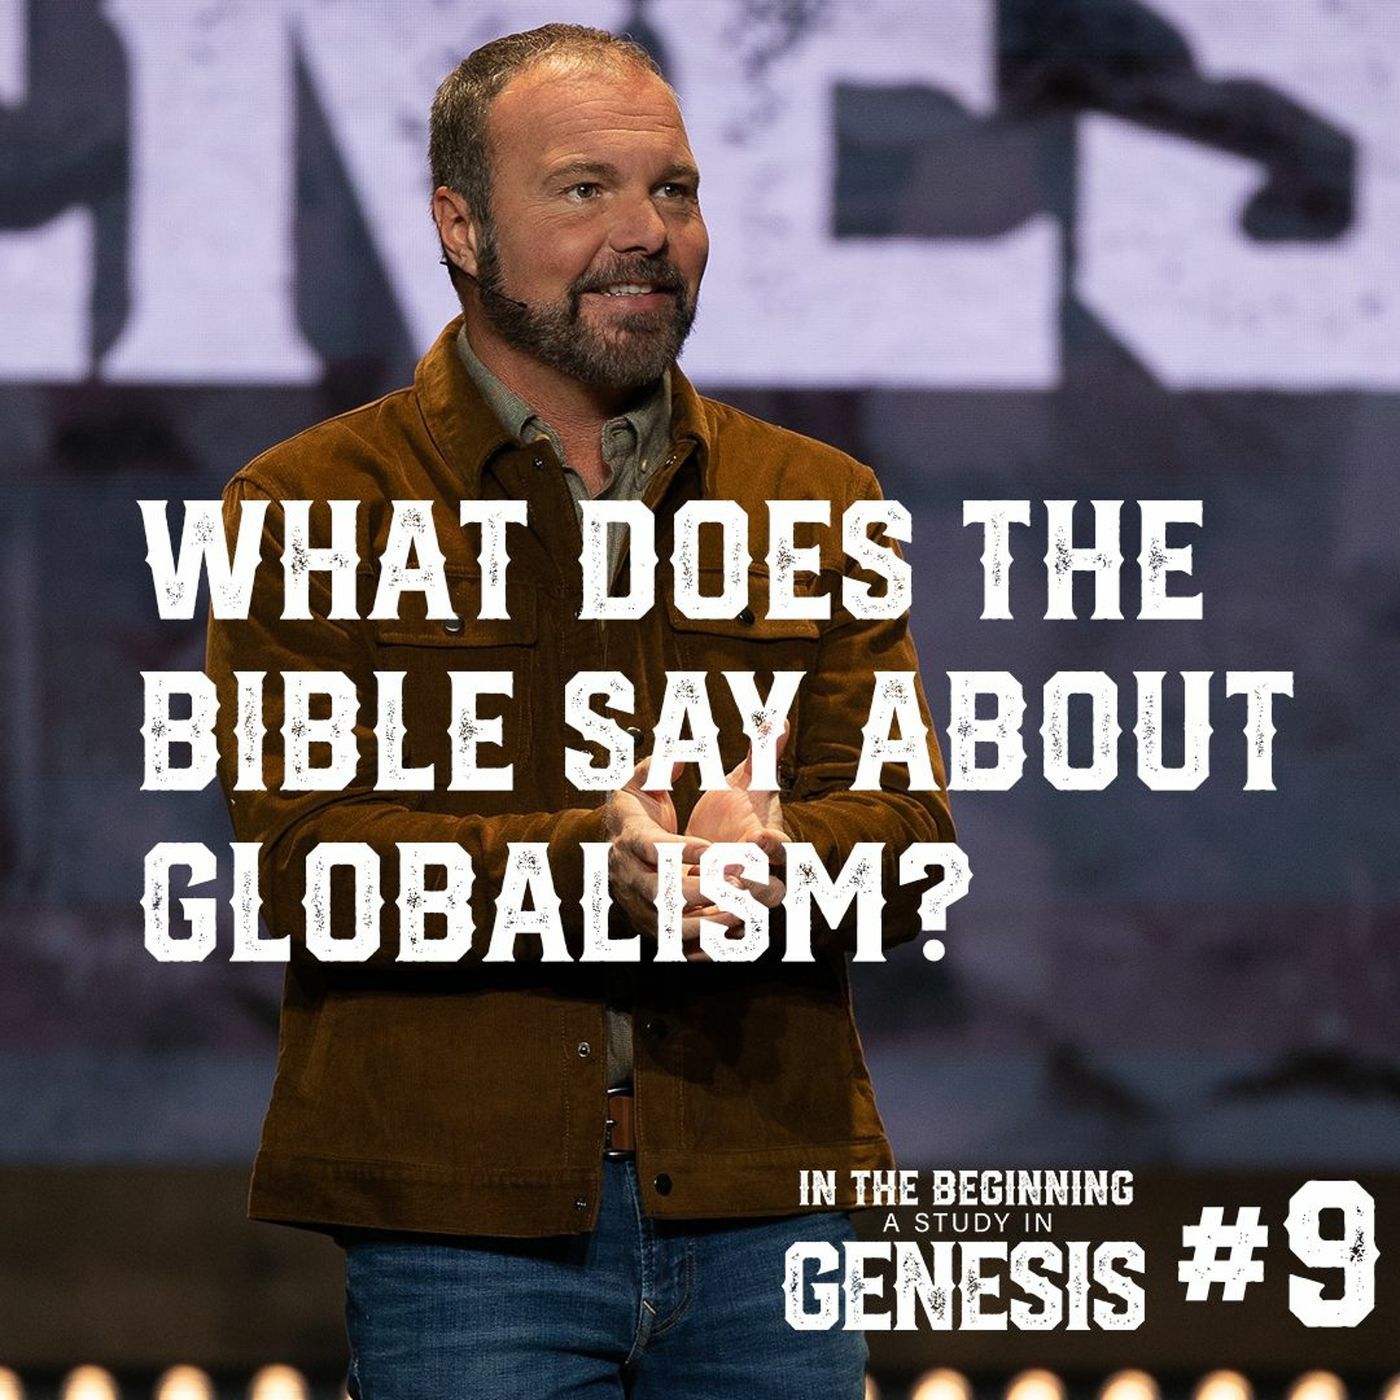 Genesis #9 - What Does the Bible Say About Globalism?